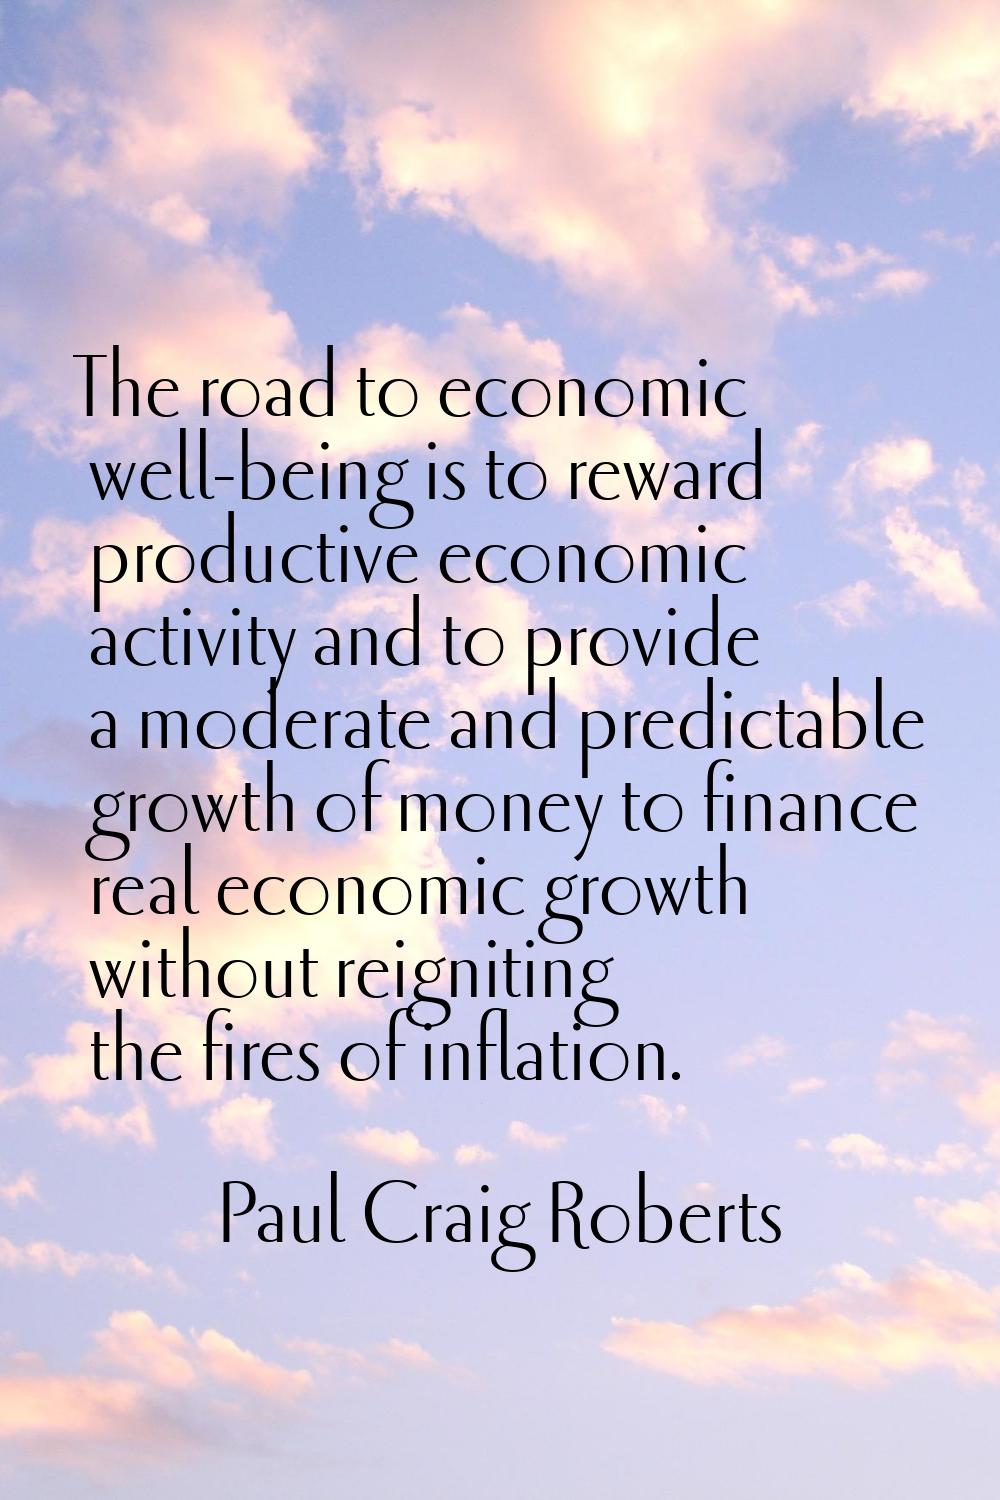 The road to economic well-being is to reward productive economic activity and to provide a moderate